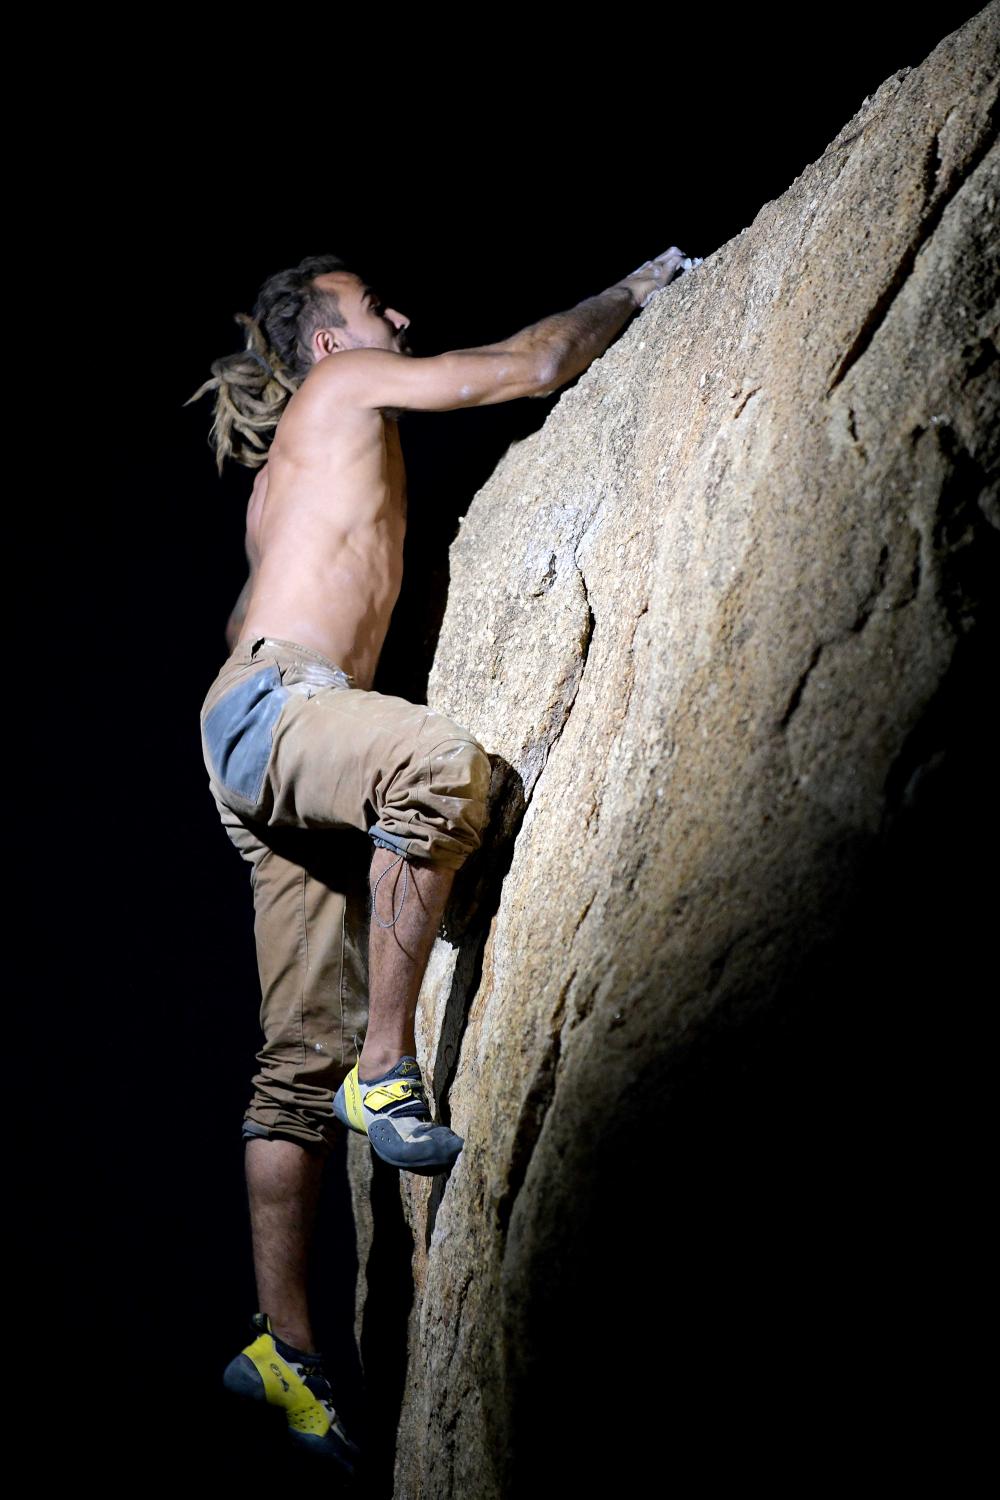 Climbers can do this all night long